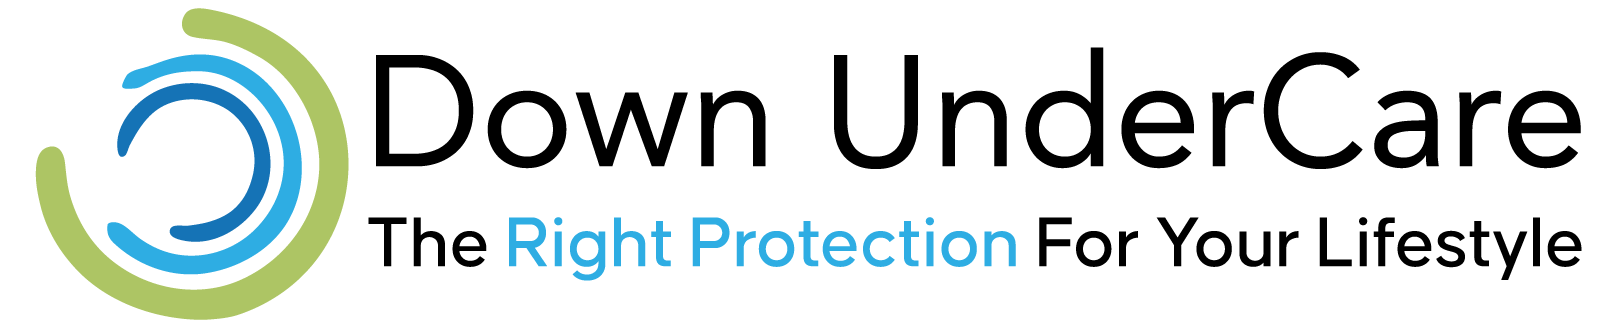 https://downundercare.com.au/wp-content/uploads/2024/02/cropped-Downundercare-logo-and-strapline-RGB.png